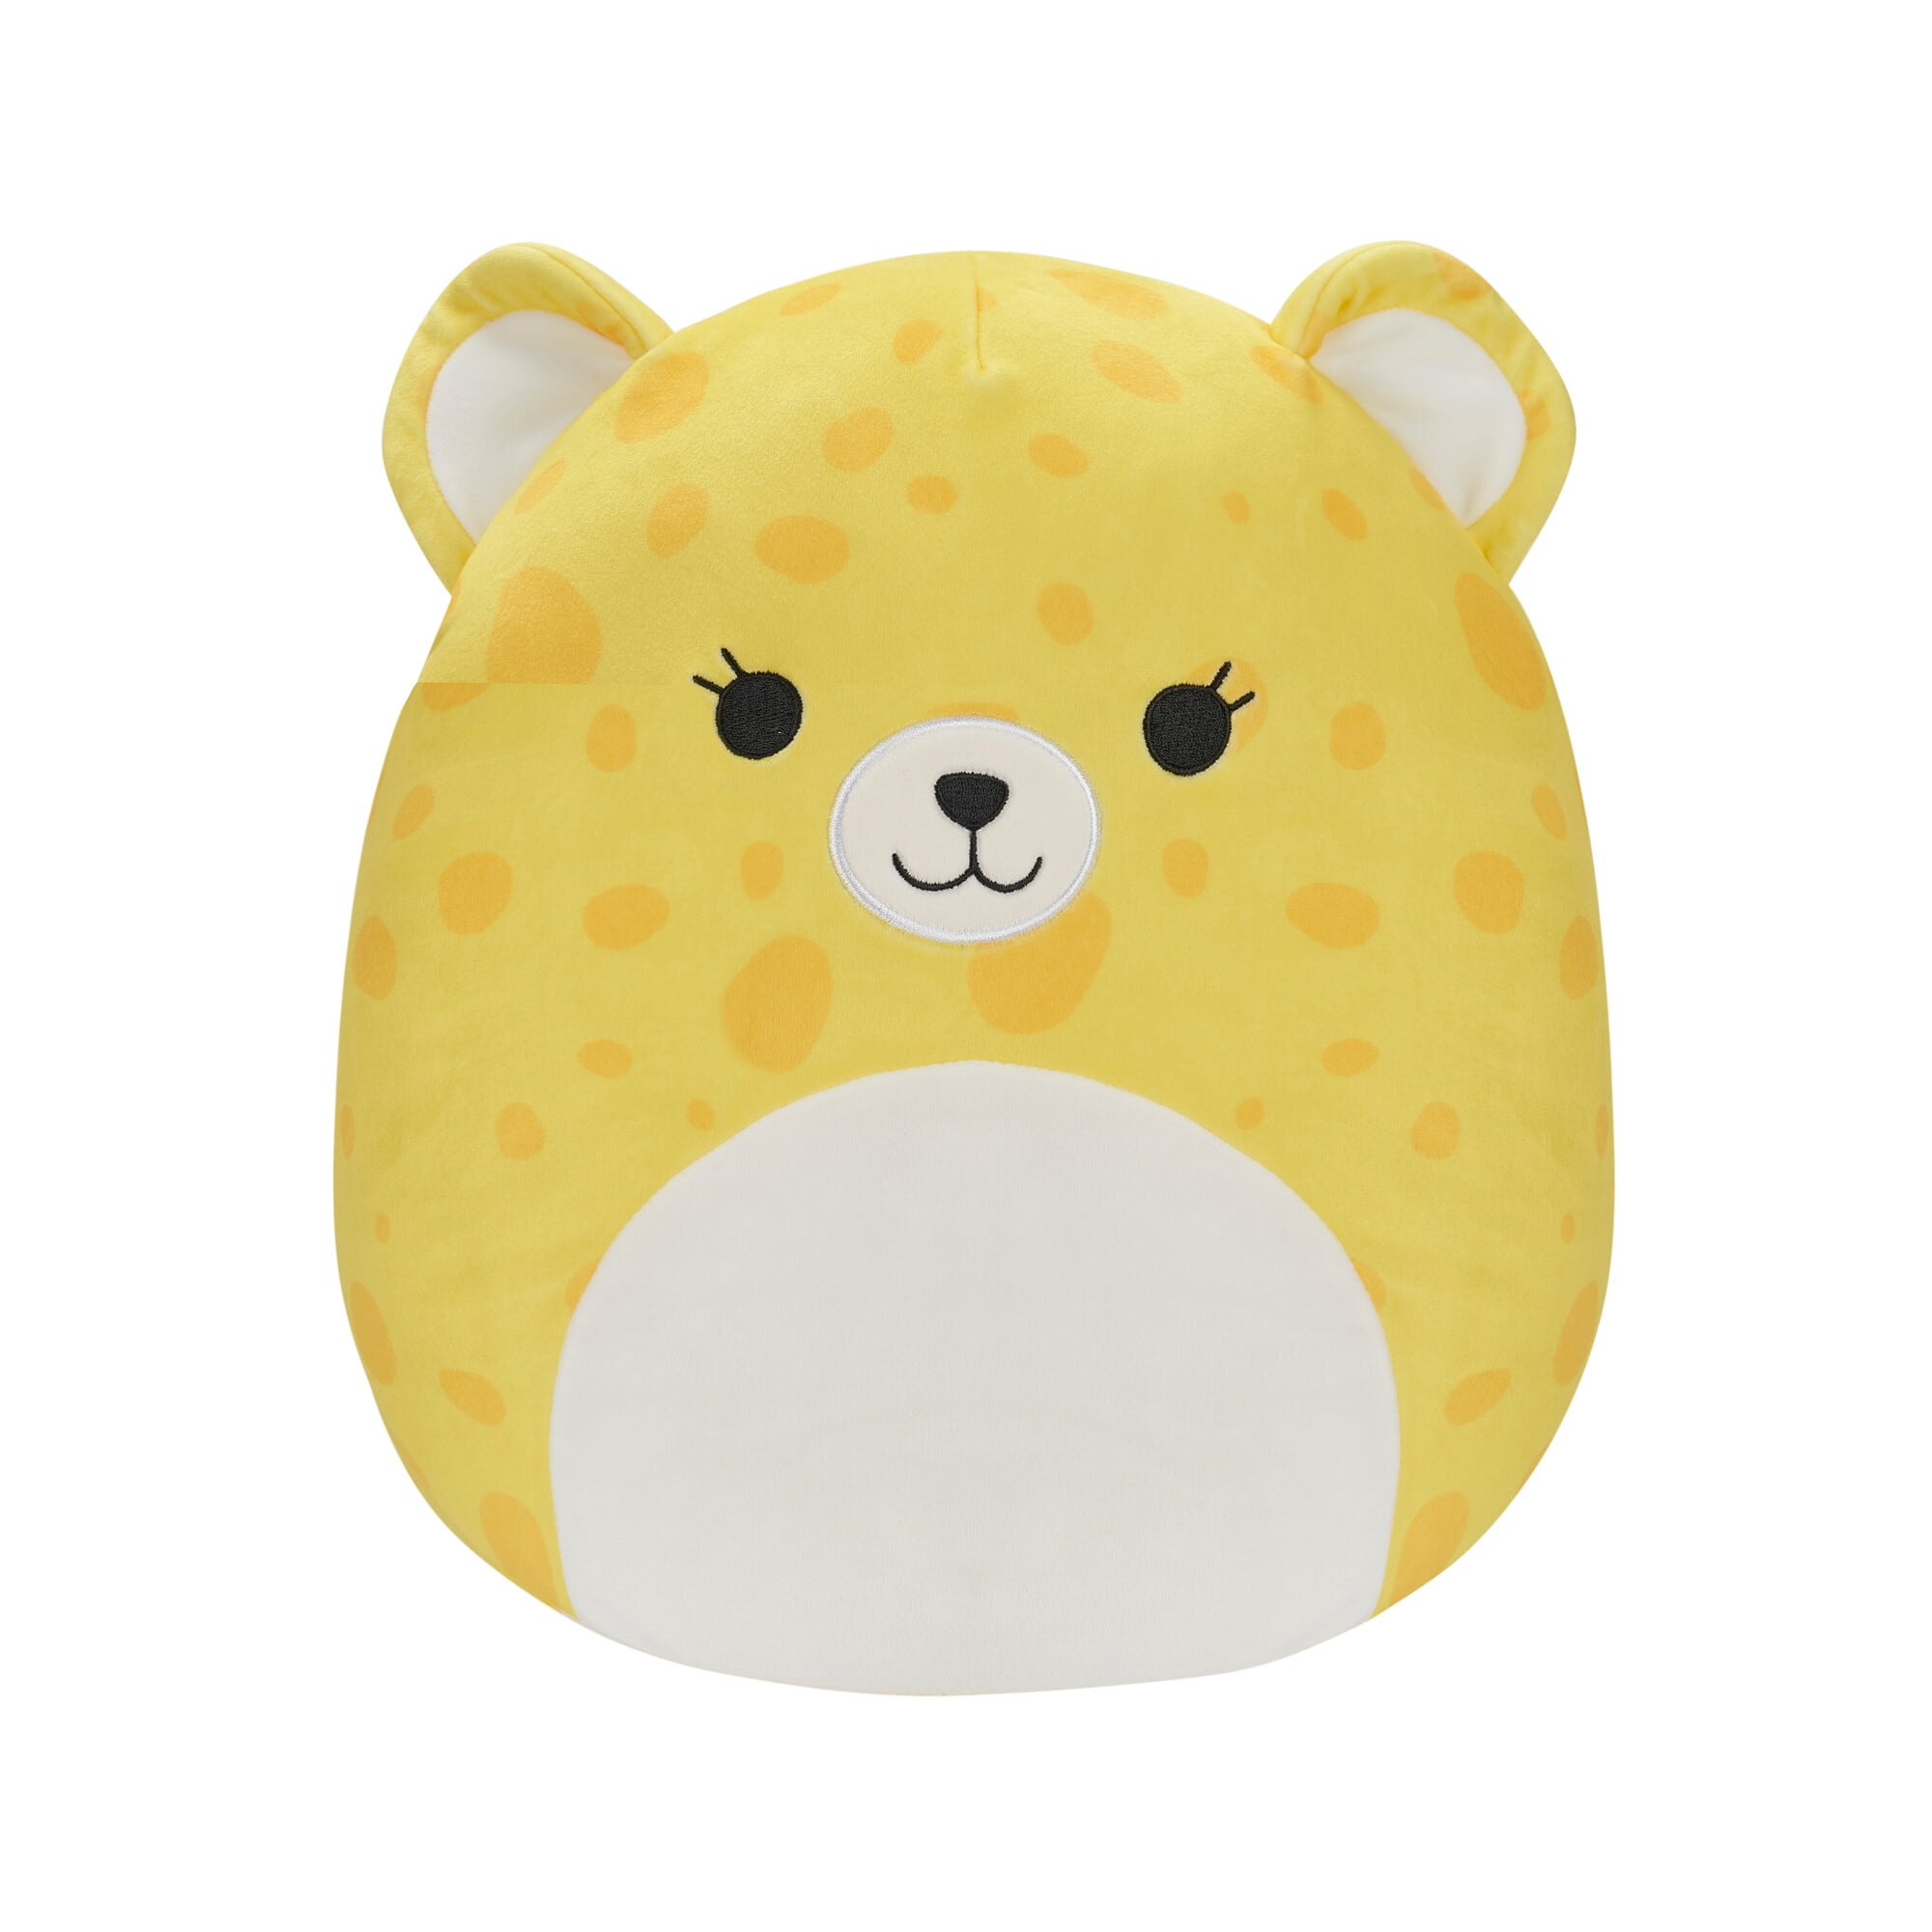 Squishmallows Official Plush 12 inch Lexie the Cheetah - Child's Ultra Soft  Stuffed Toy 